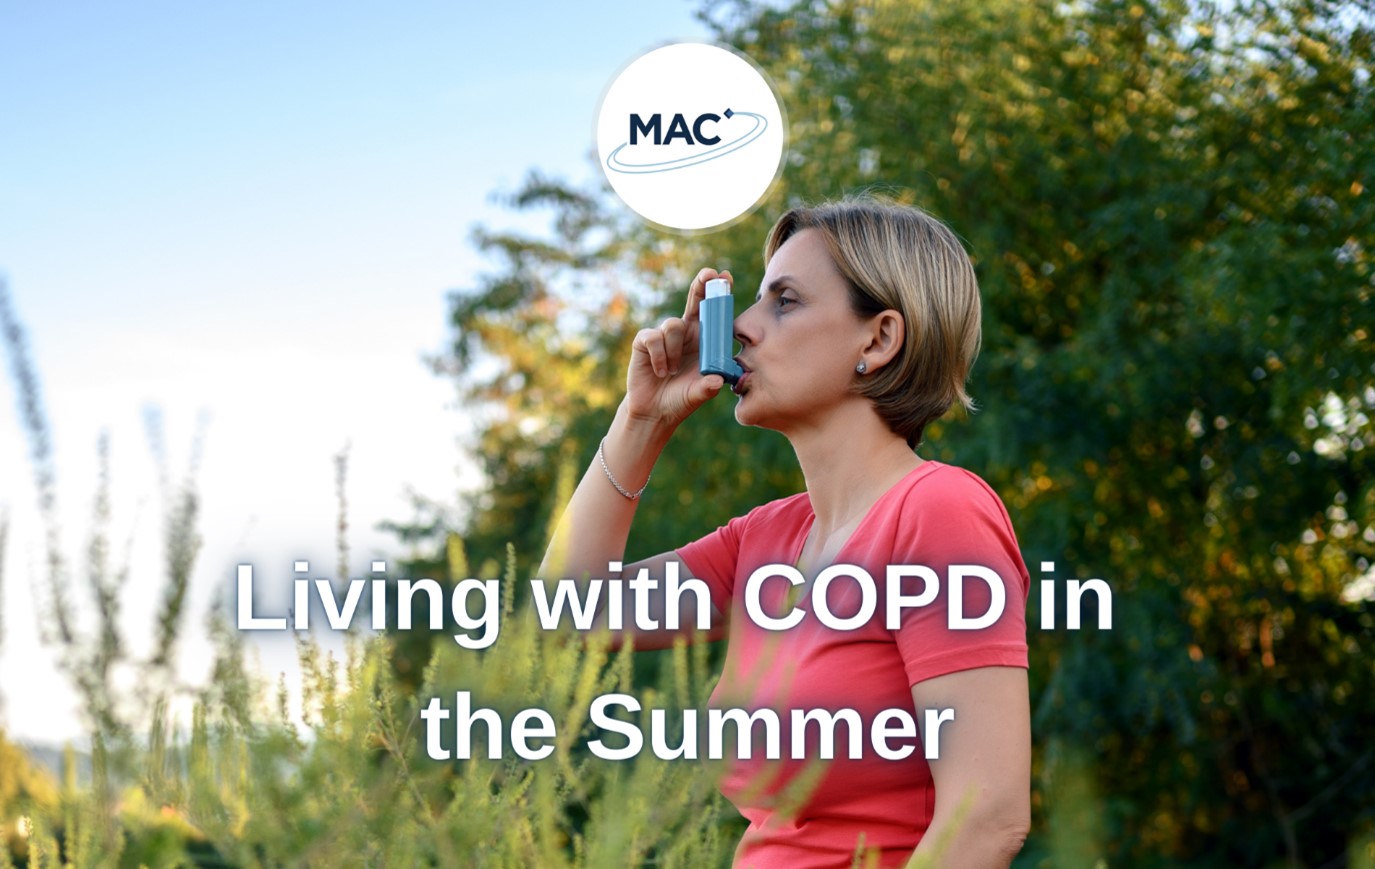 Living with COPD in the summer